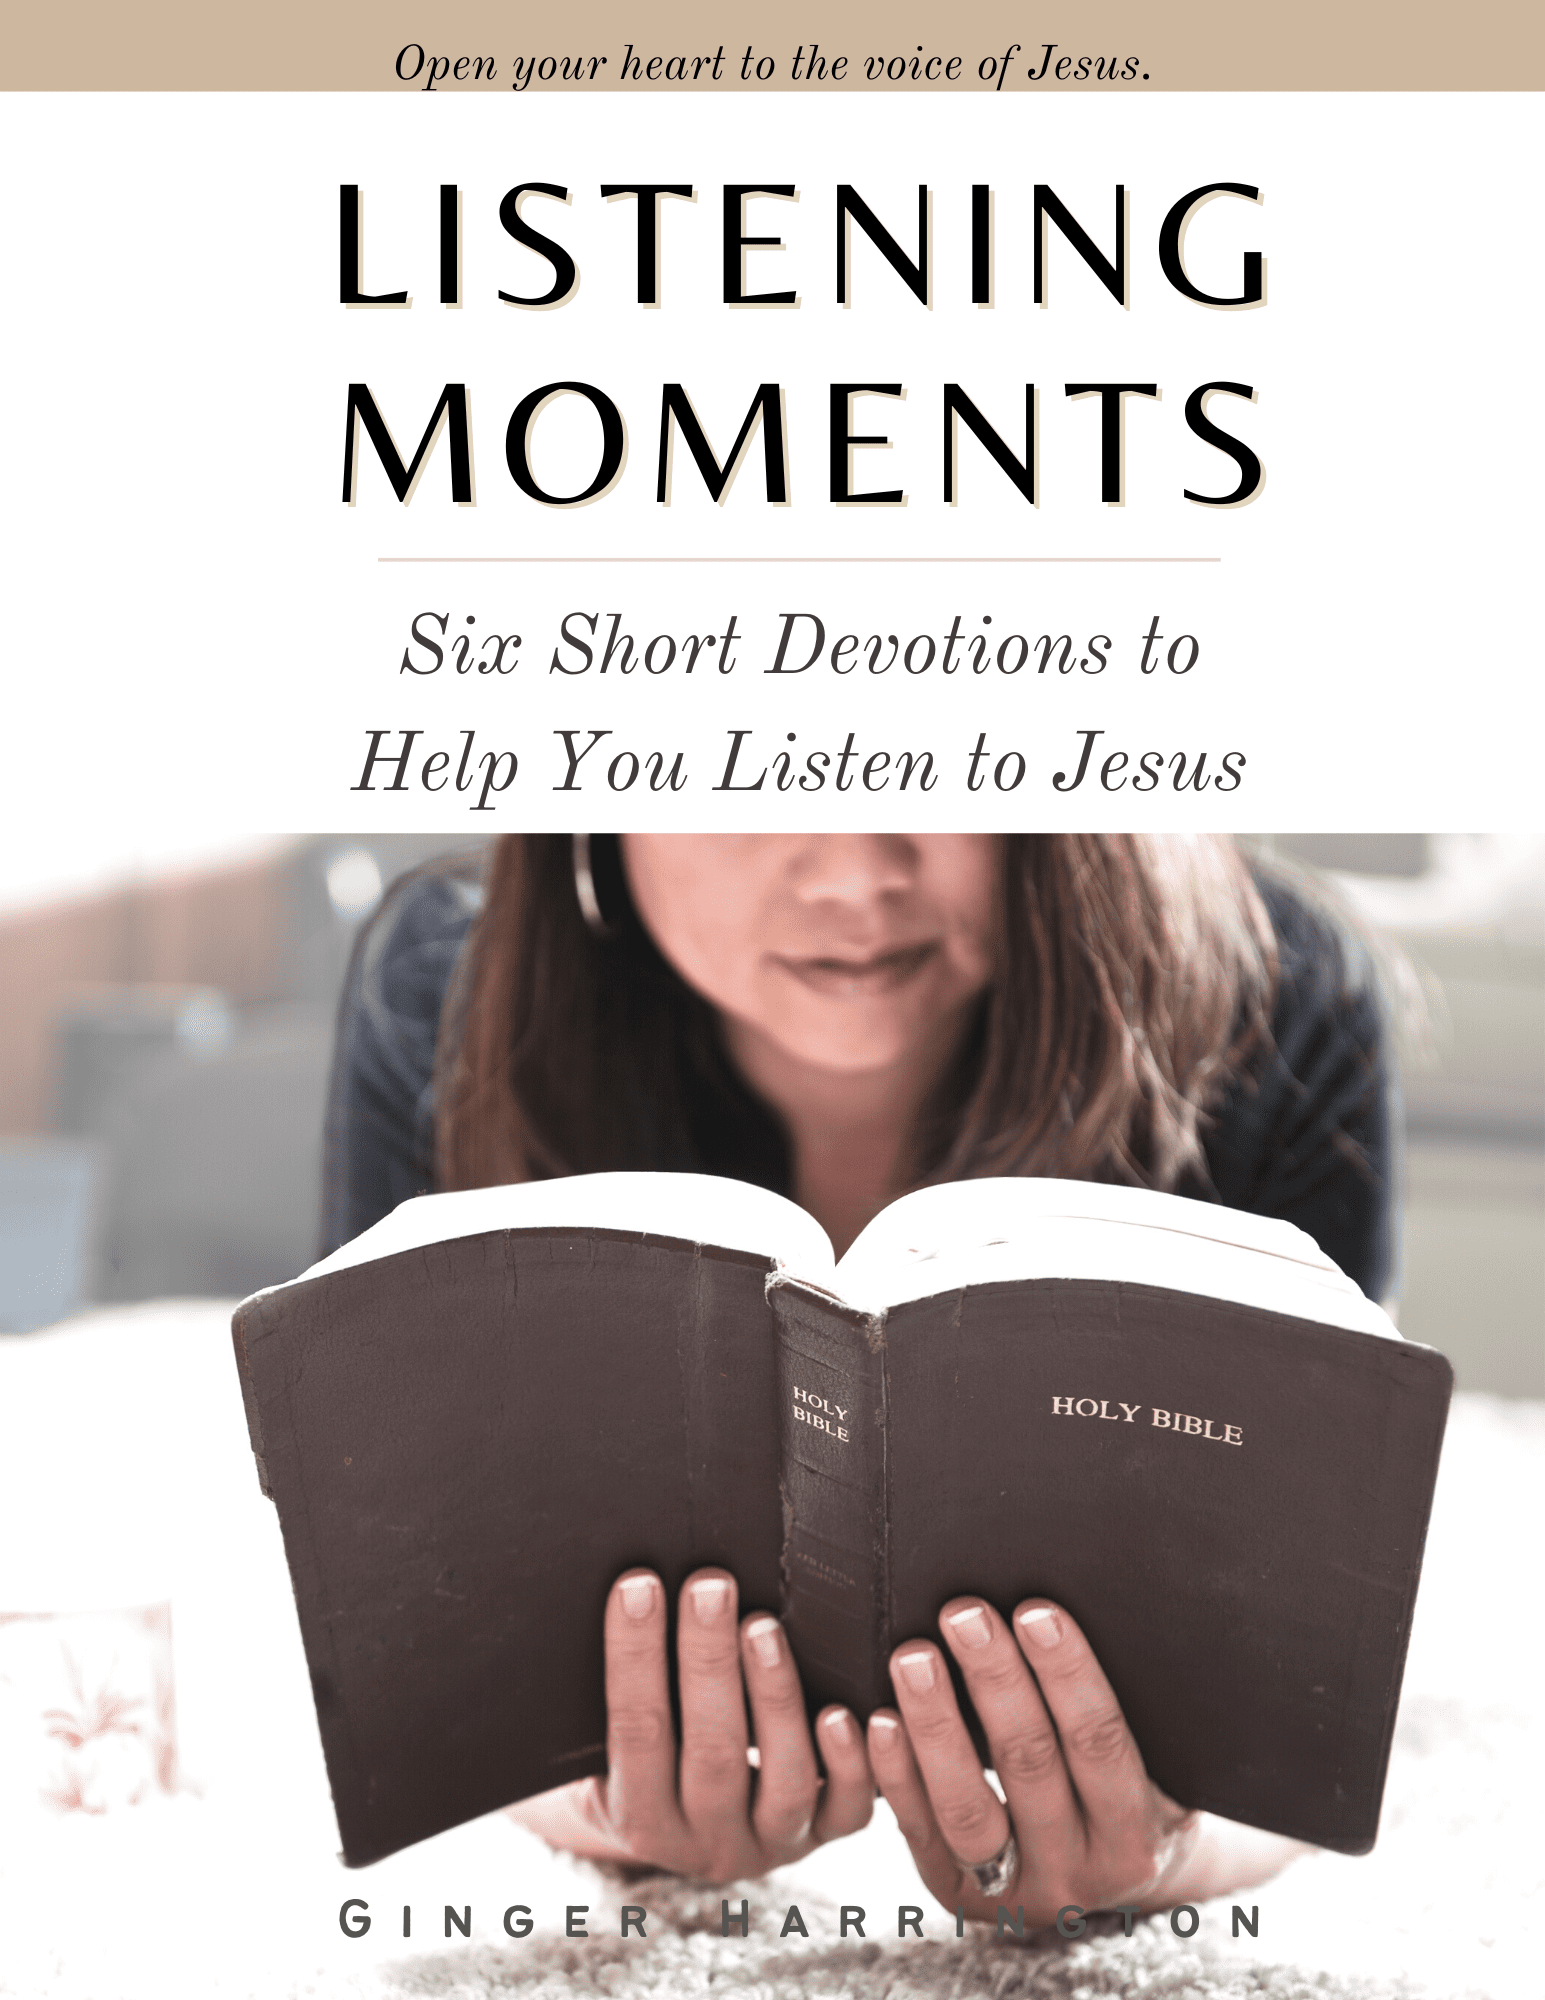 Woman reading the Bible is the cover image for a devotional on listening to Jesus.